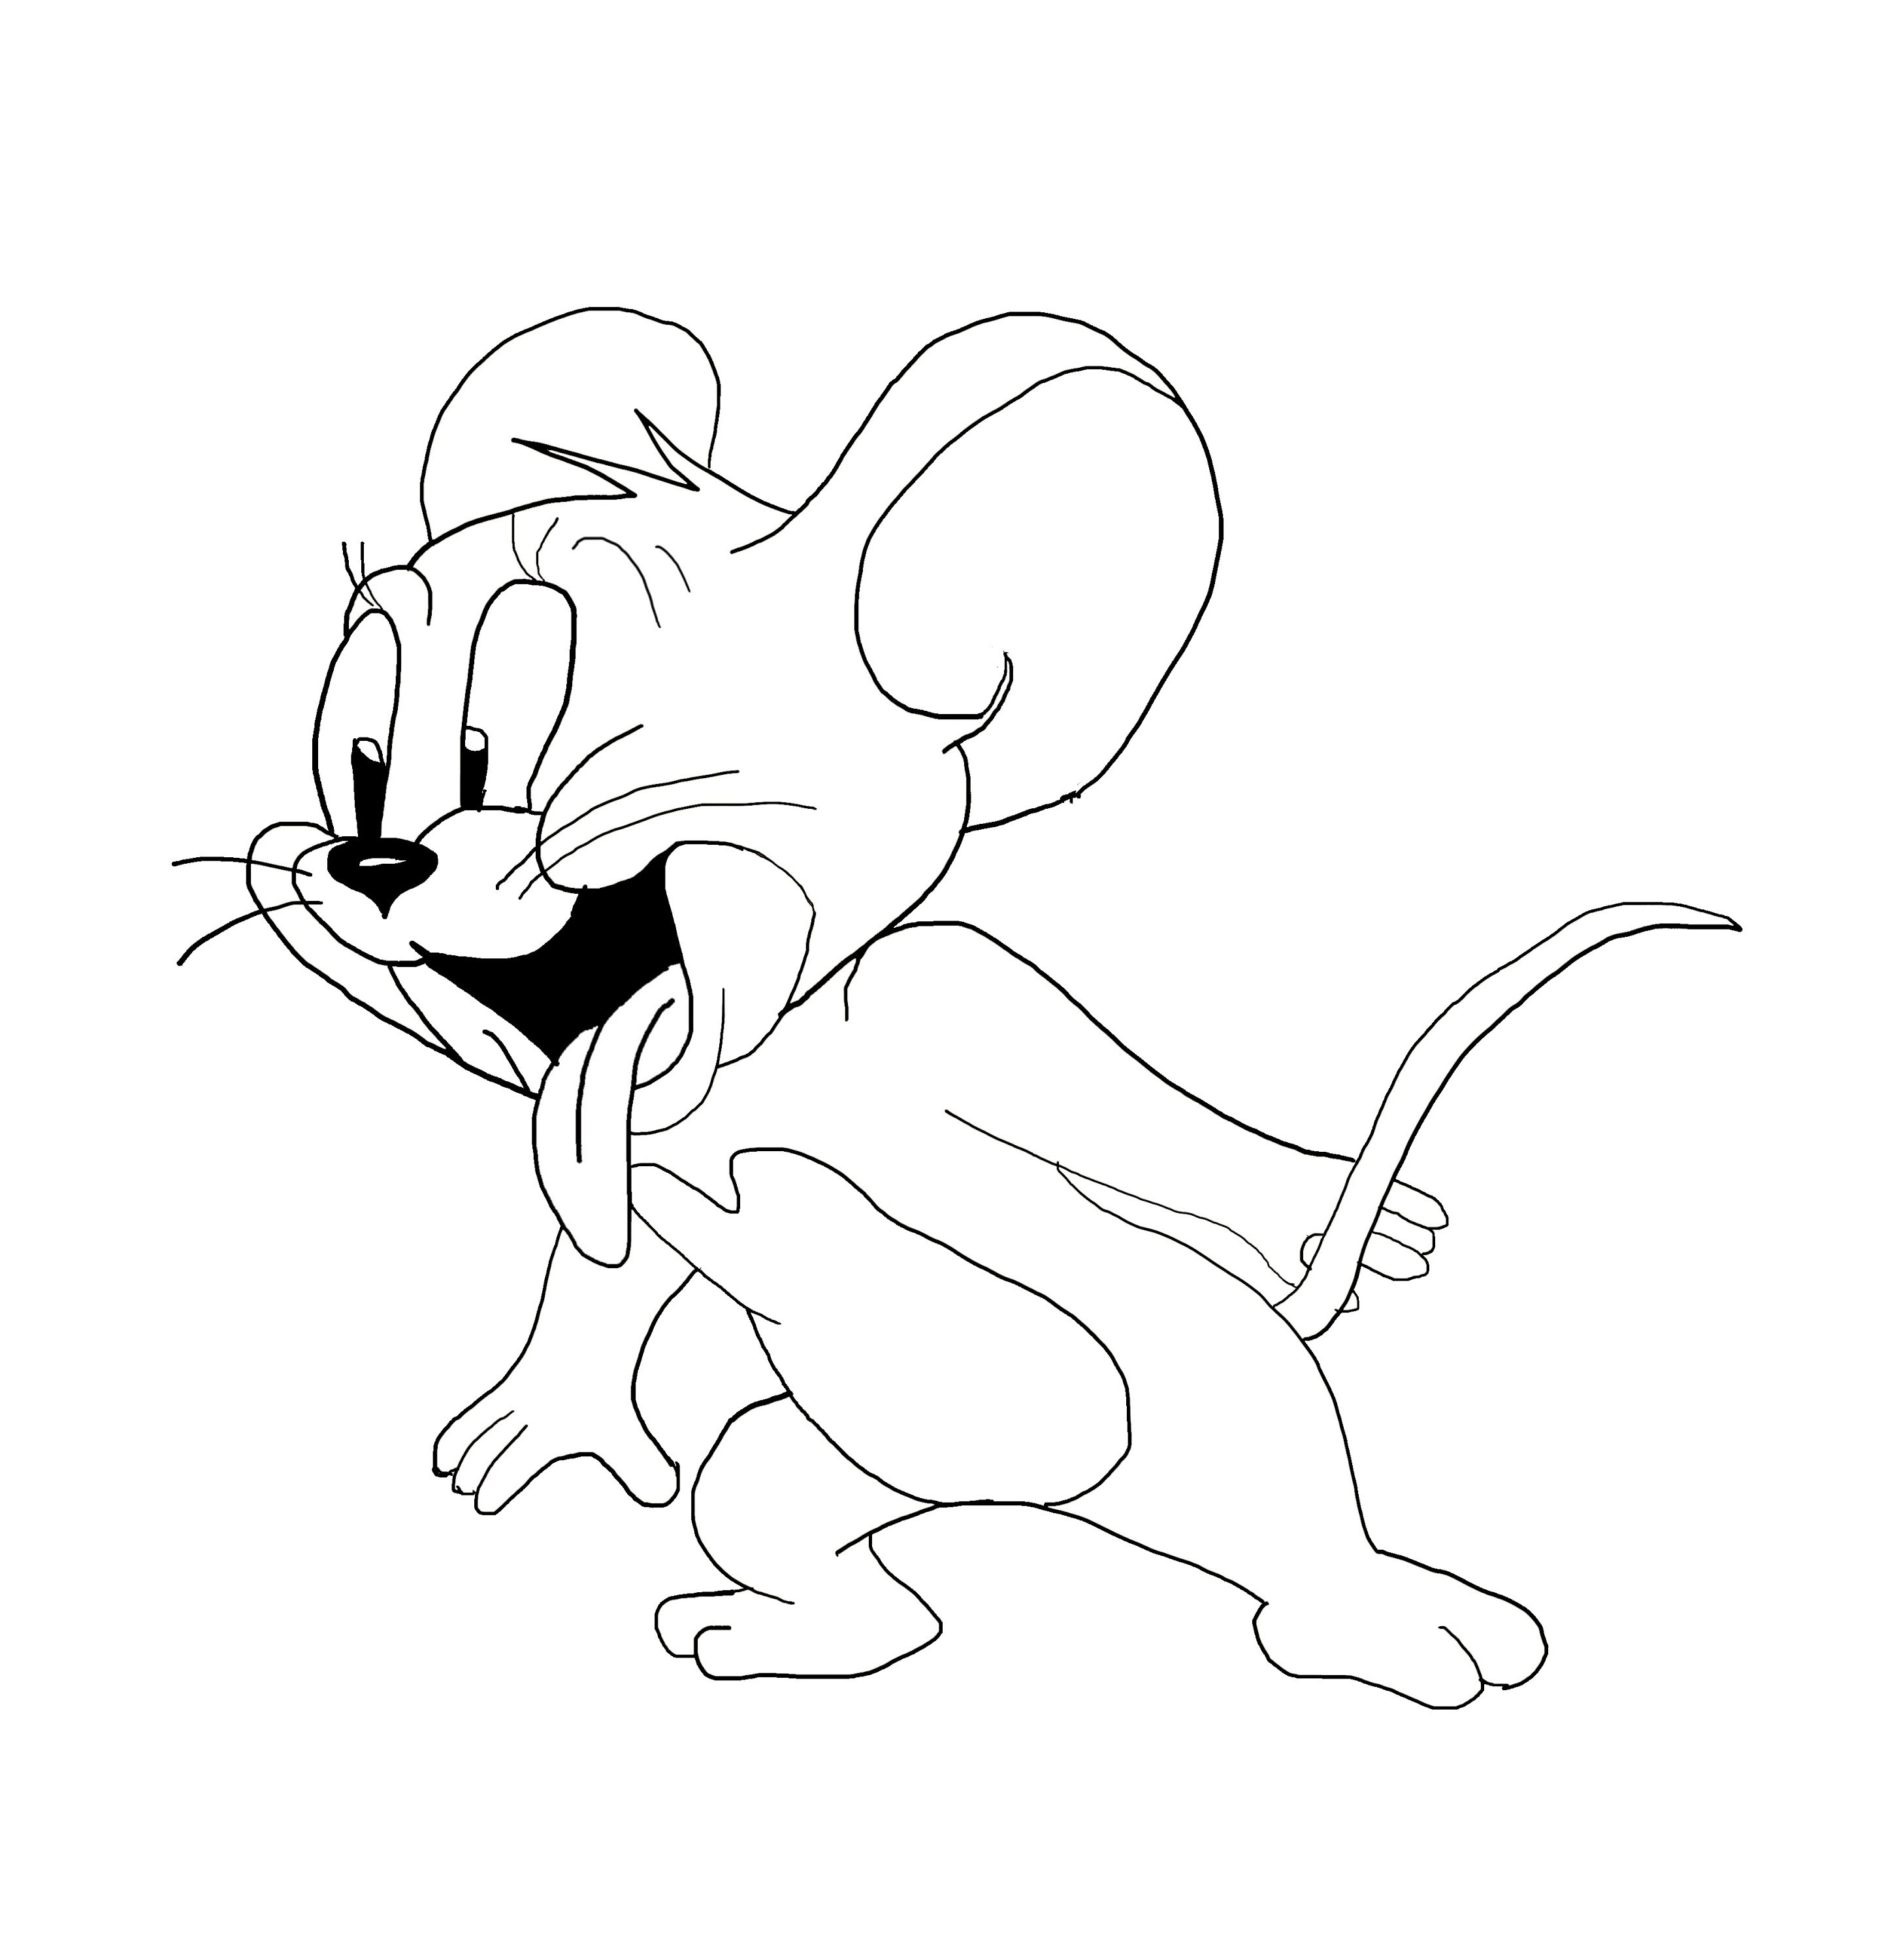  Tom And Jerry Sketch Drawing for Kindergarten